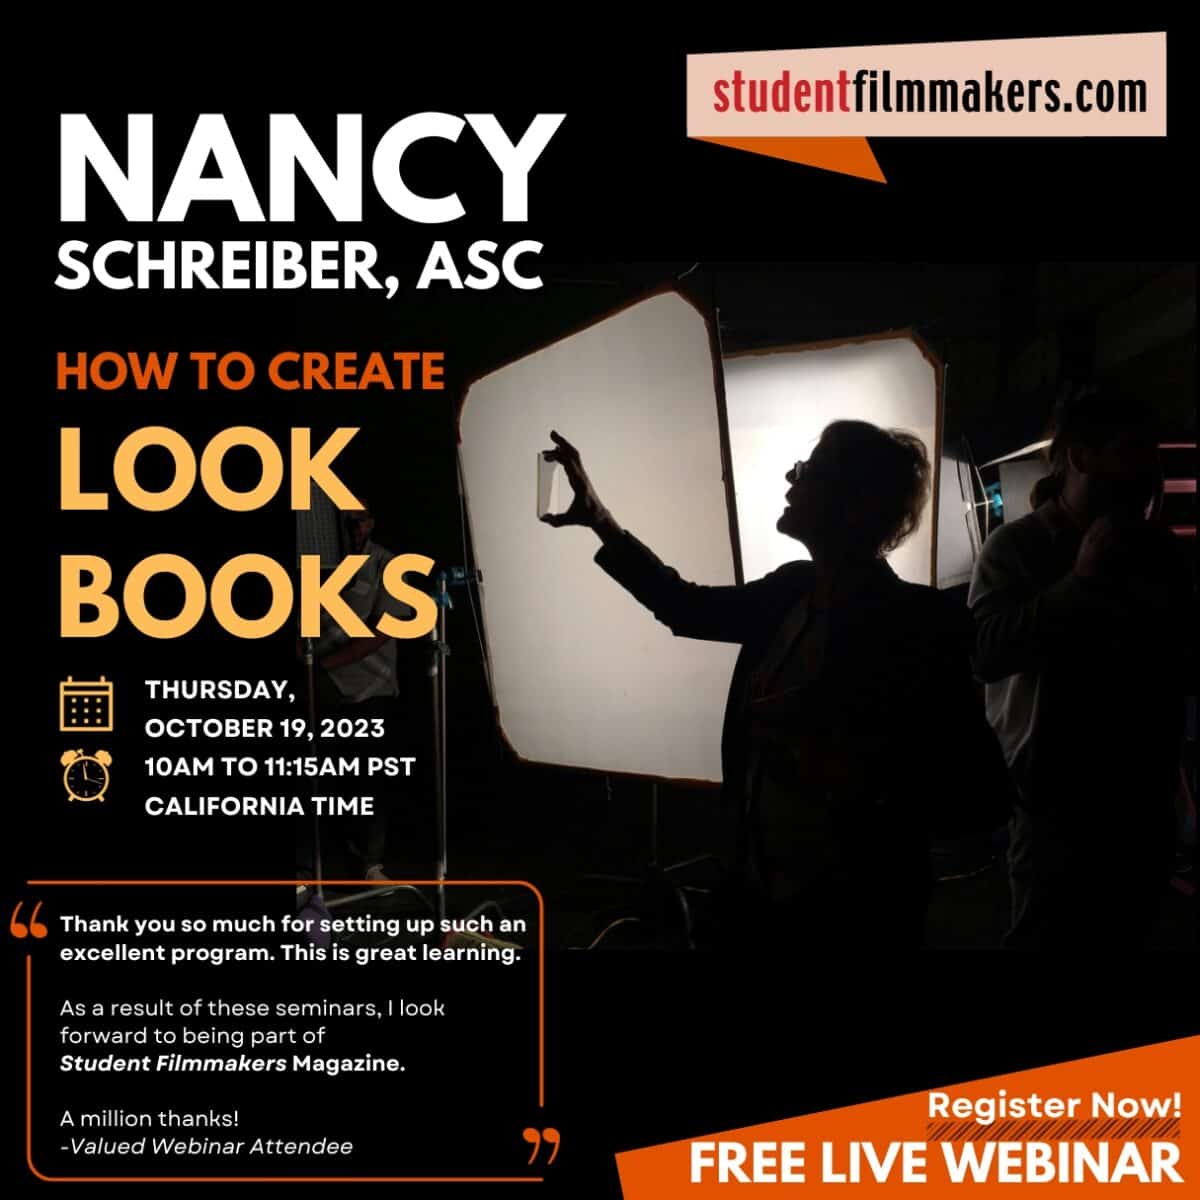 Nancy Schreiber ASC: How to Create Look Books. Webinar Produced and Hosted by StudentFilmmakers.com and Student Filmmakers Magazine.